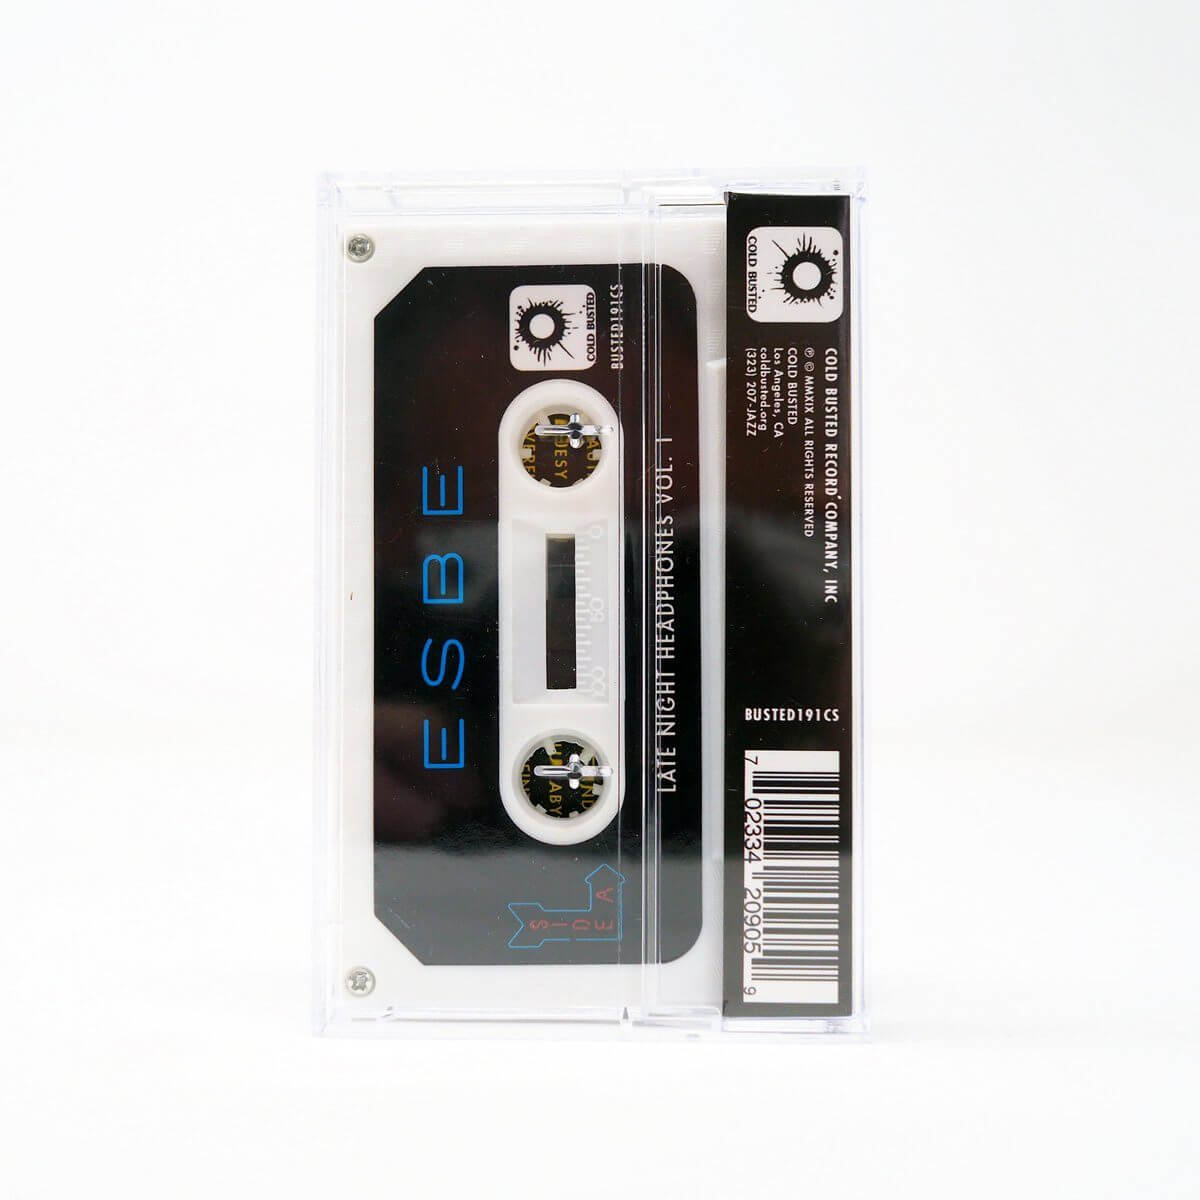 Esbe - Late Night Headphones Vol. 1 - Limited Edition Cassette - Cold Busted